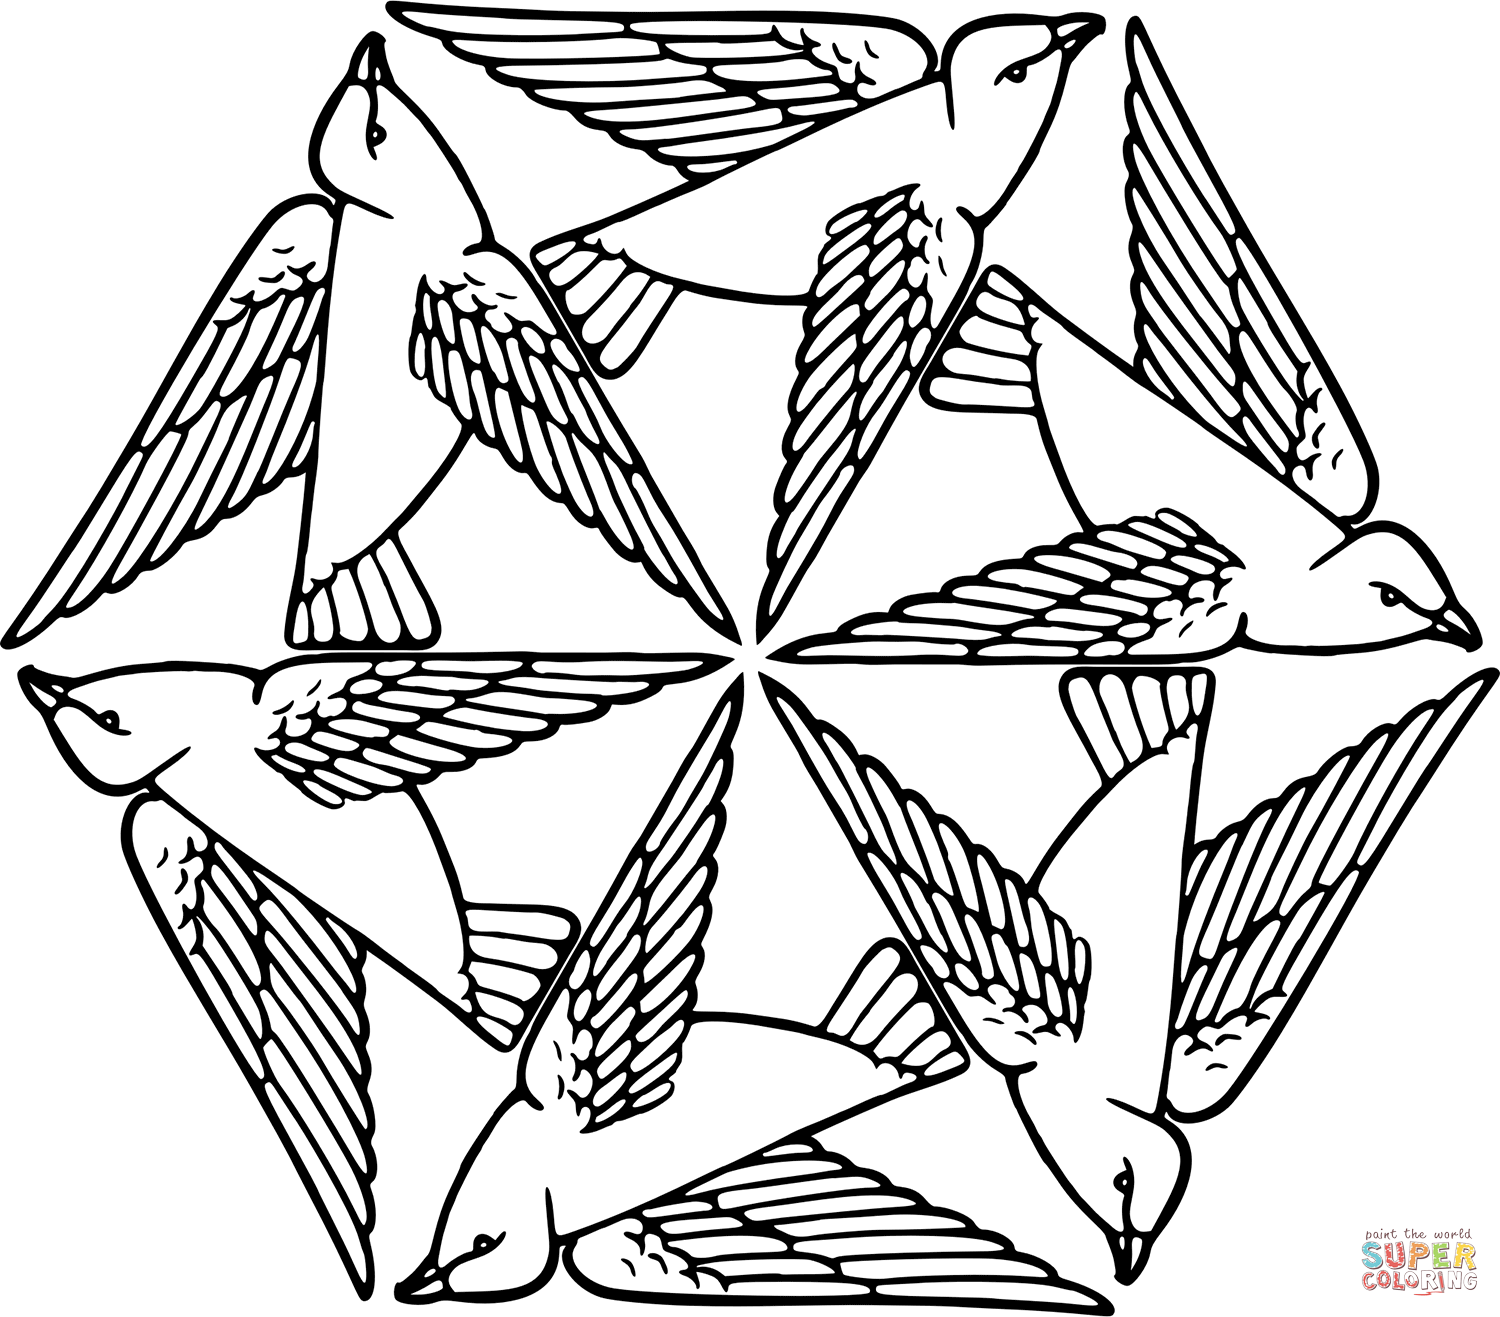 Birds tessellatoin coloring page free printable coloring pages